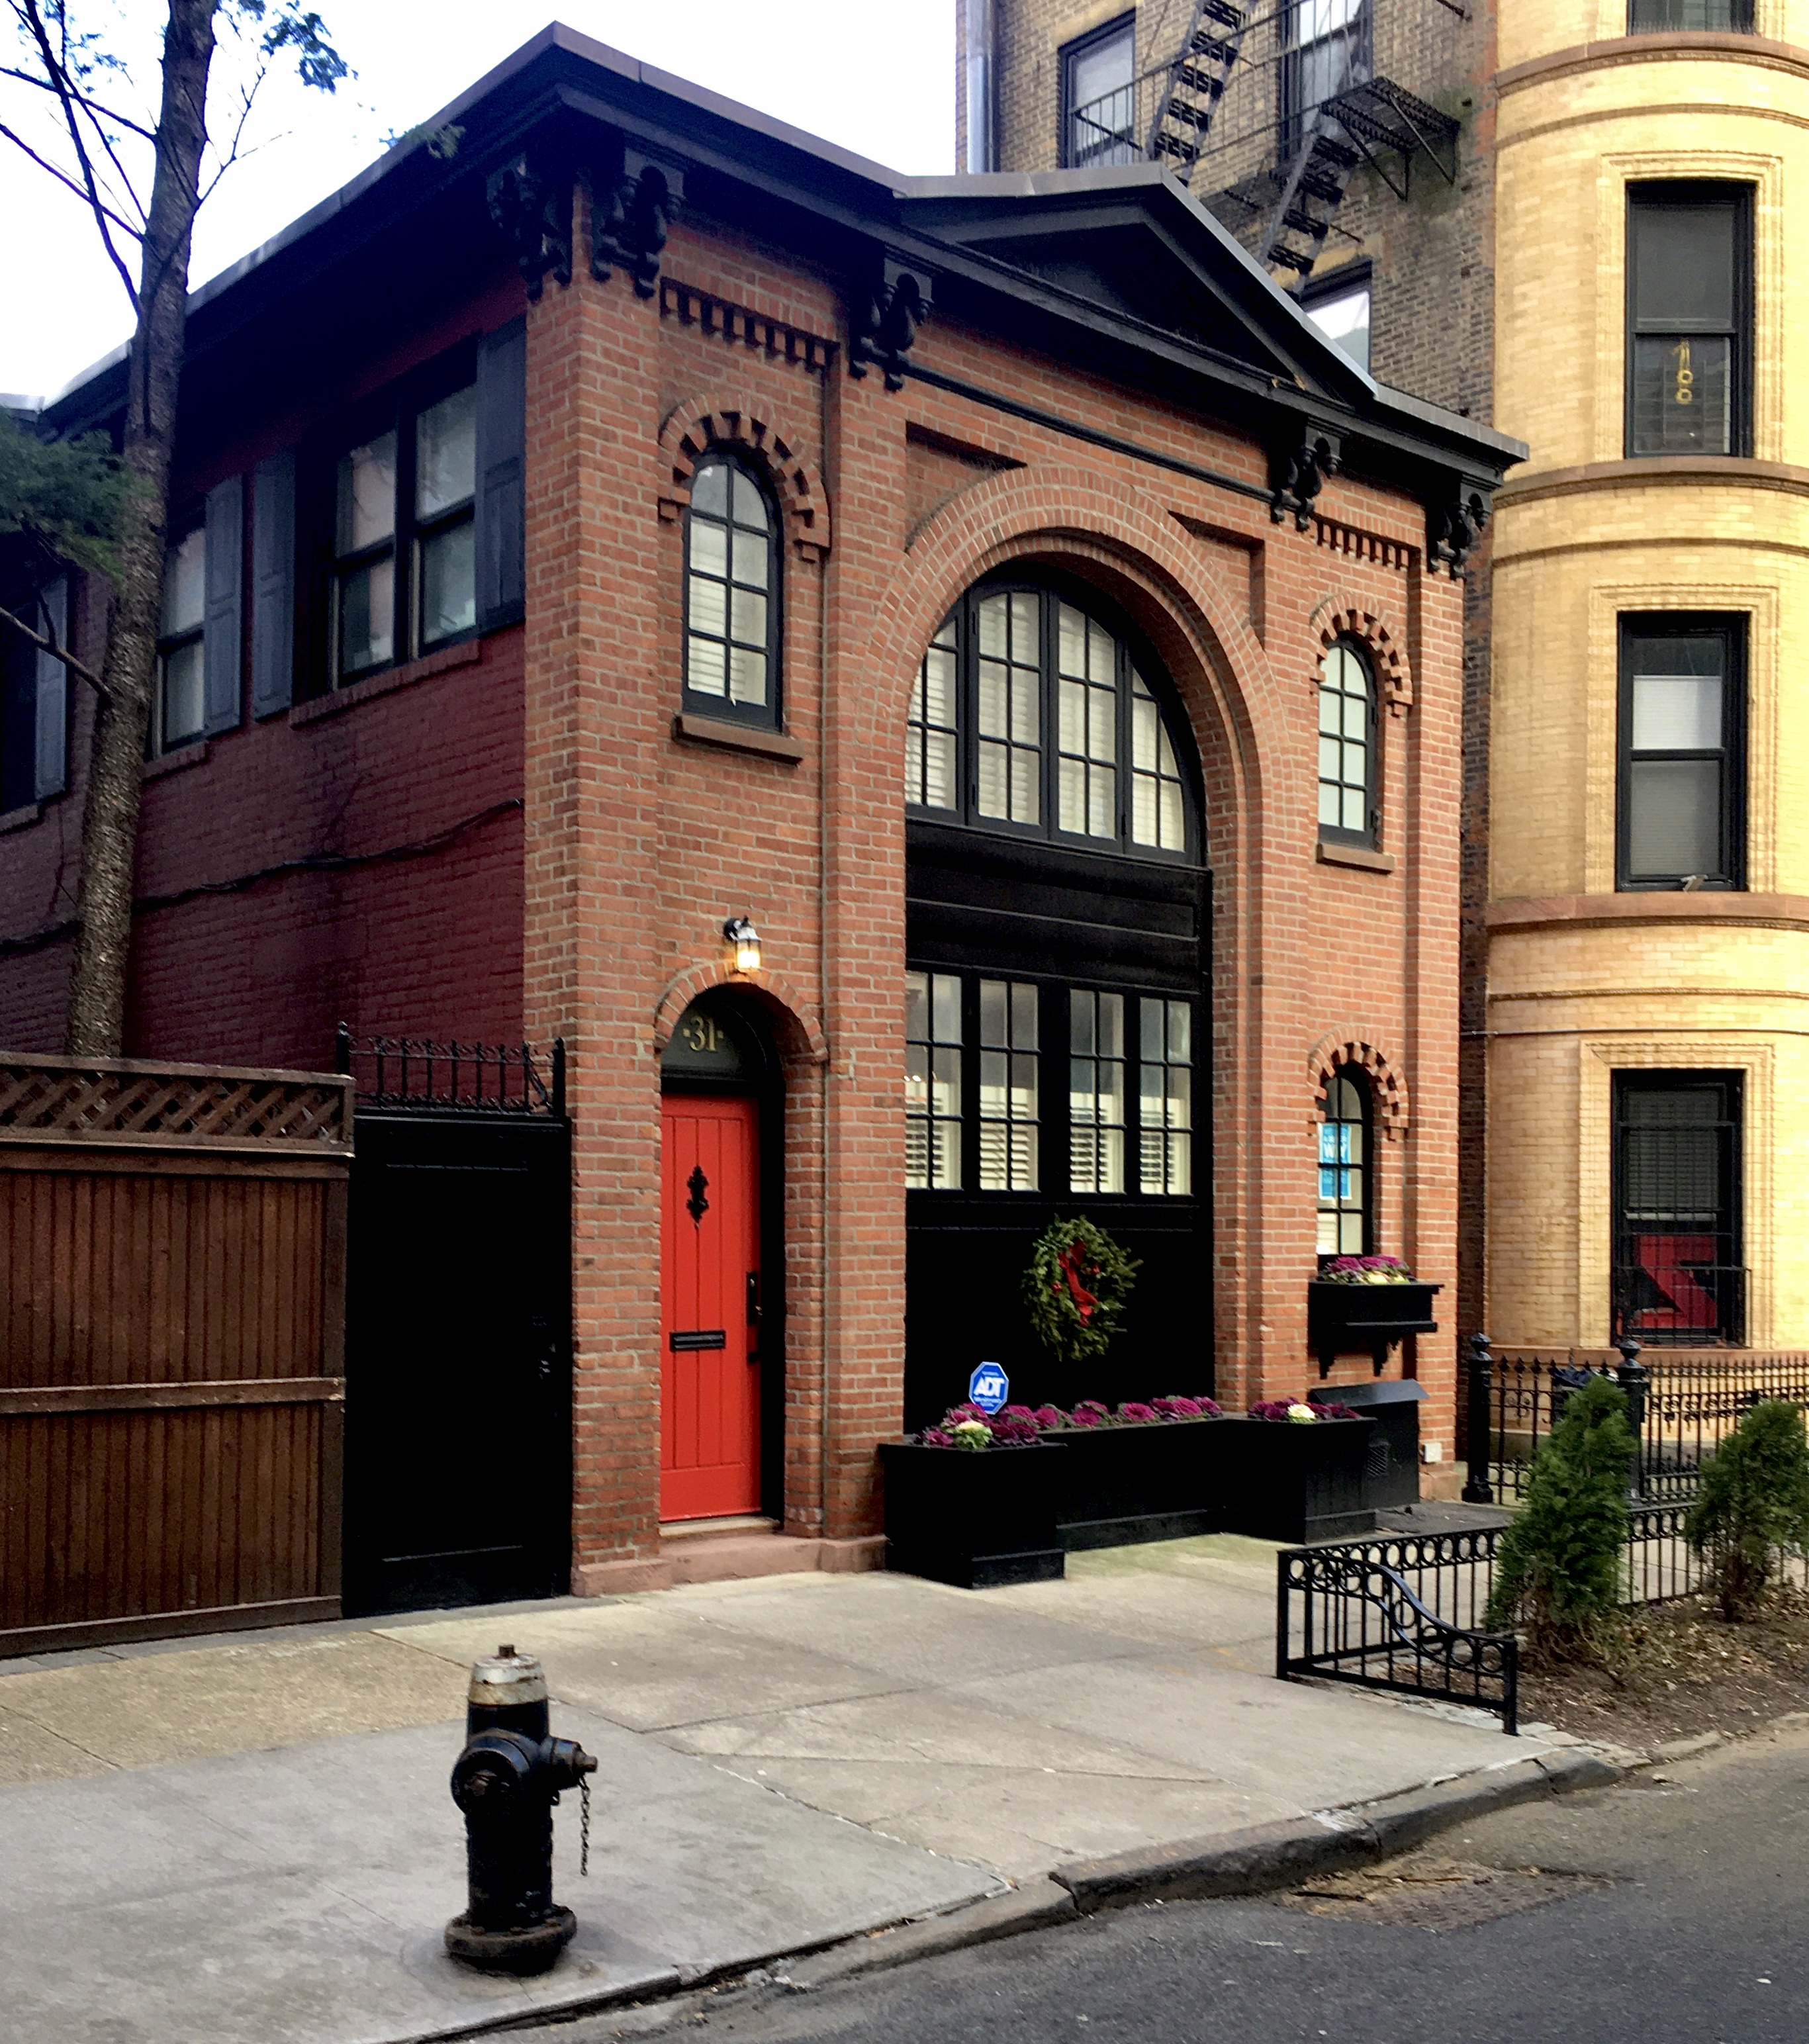 This eye-catching carriage house is 31 Pineapple St. Photo: Lore Croghan/Brooklyn Eagle